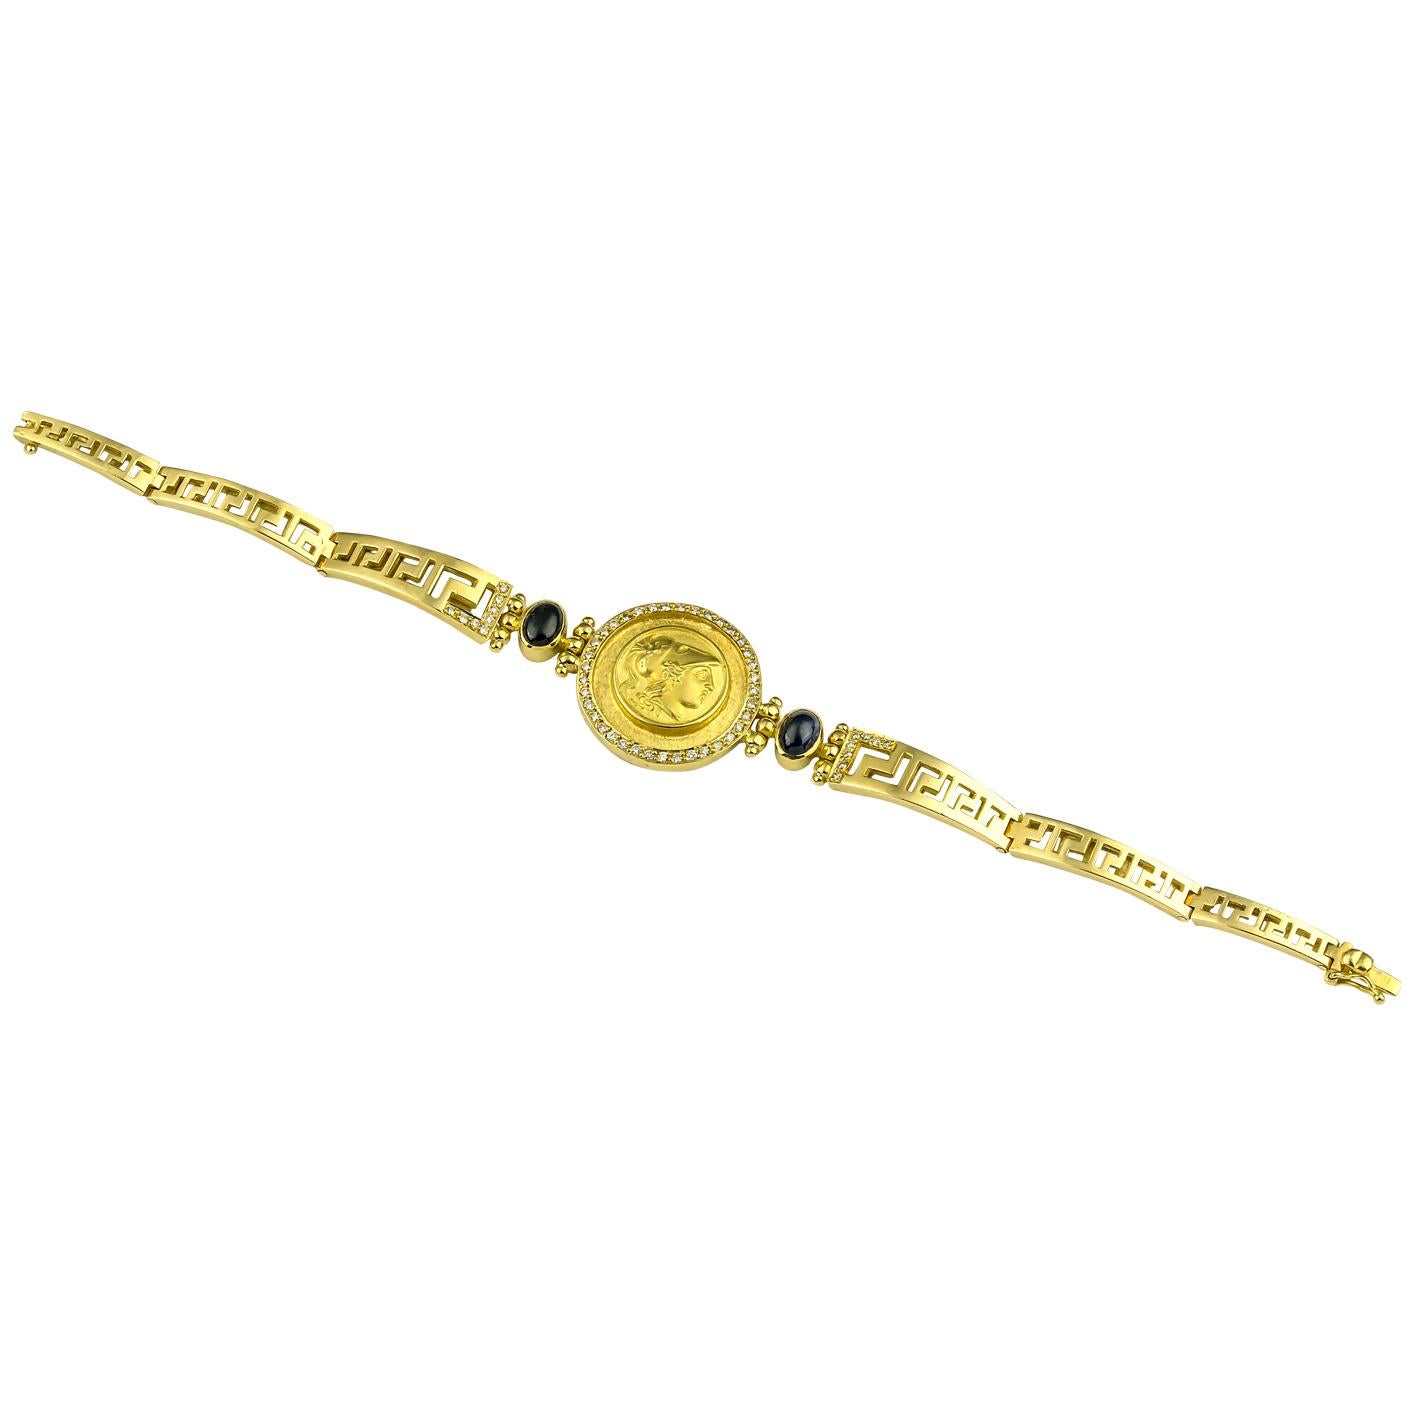 This S.Georgios designer yellow gold 18 karat Bracelet is all handmade and features a coin of the Athena (replica - a copy from the original) the Goddess of wisdom and Protector of Athens with a bezel of diamonds around it. On this art piece, we